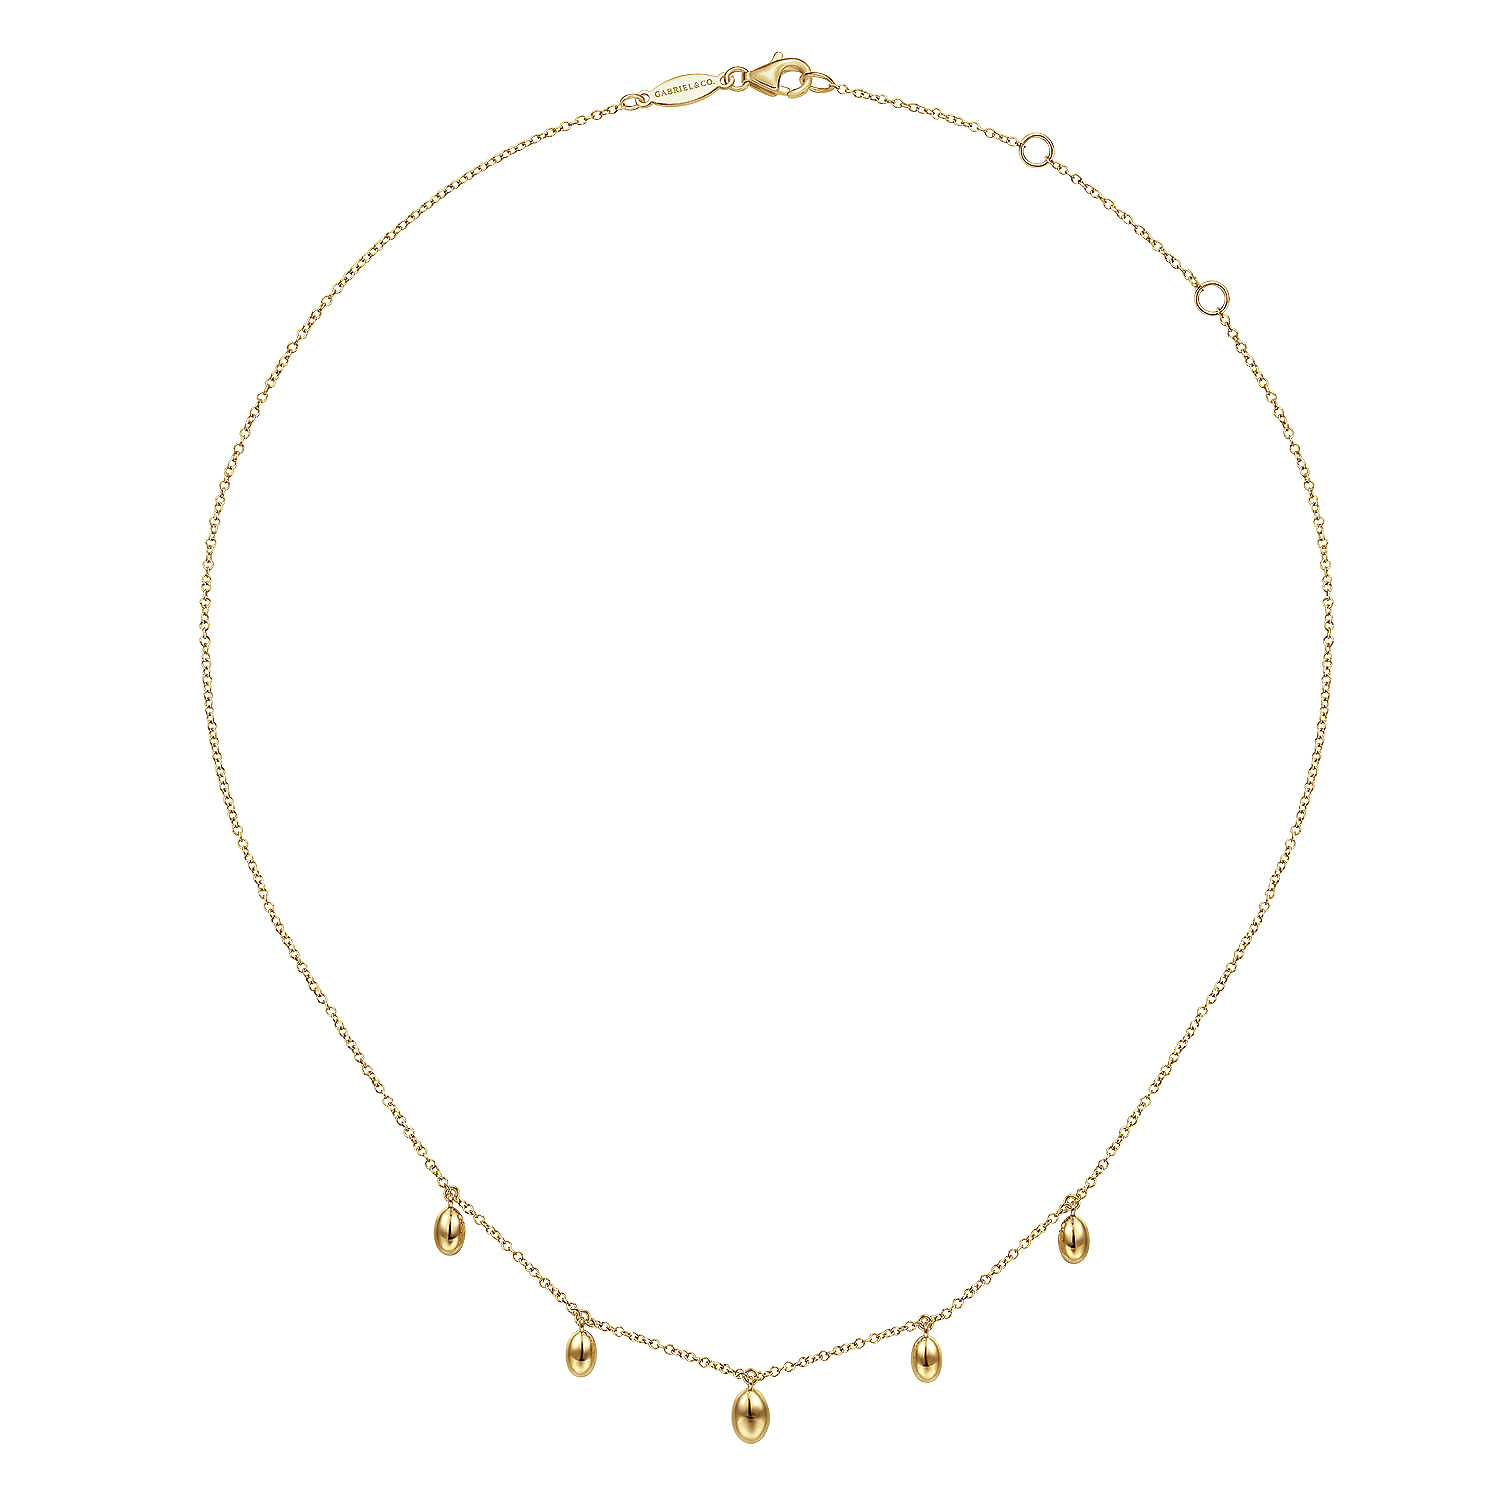 14K Yellow Gold Chain Necklace with Bujukan Bead Drops - Shot 2